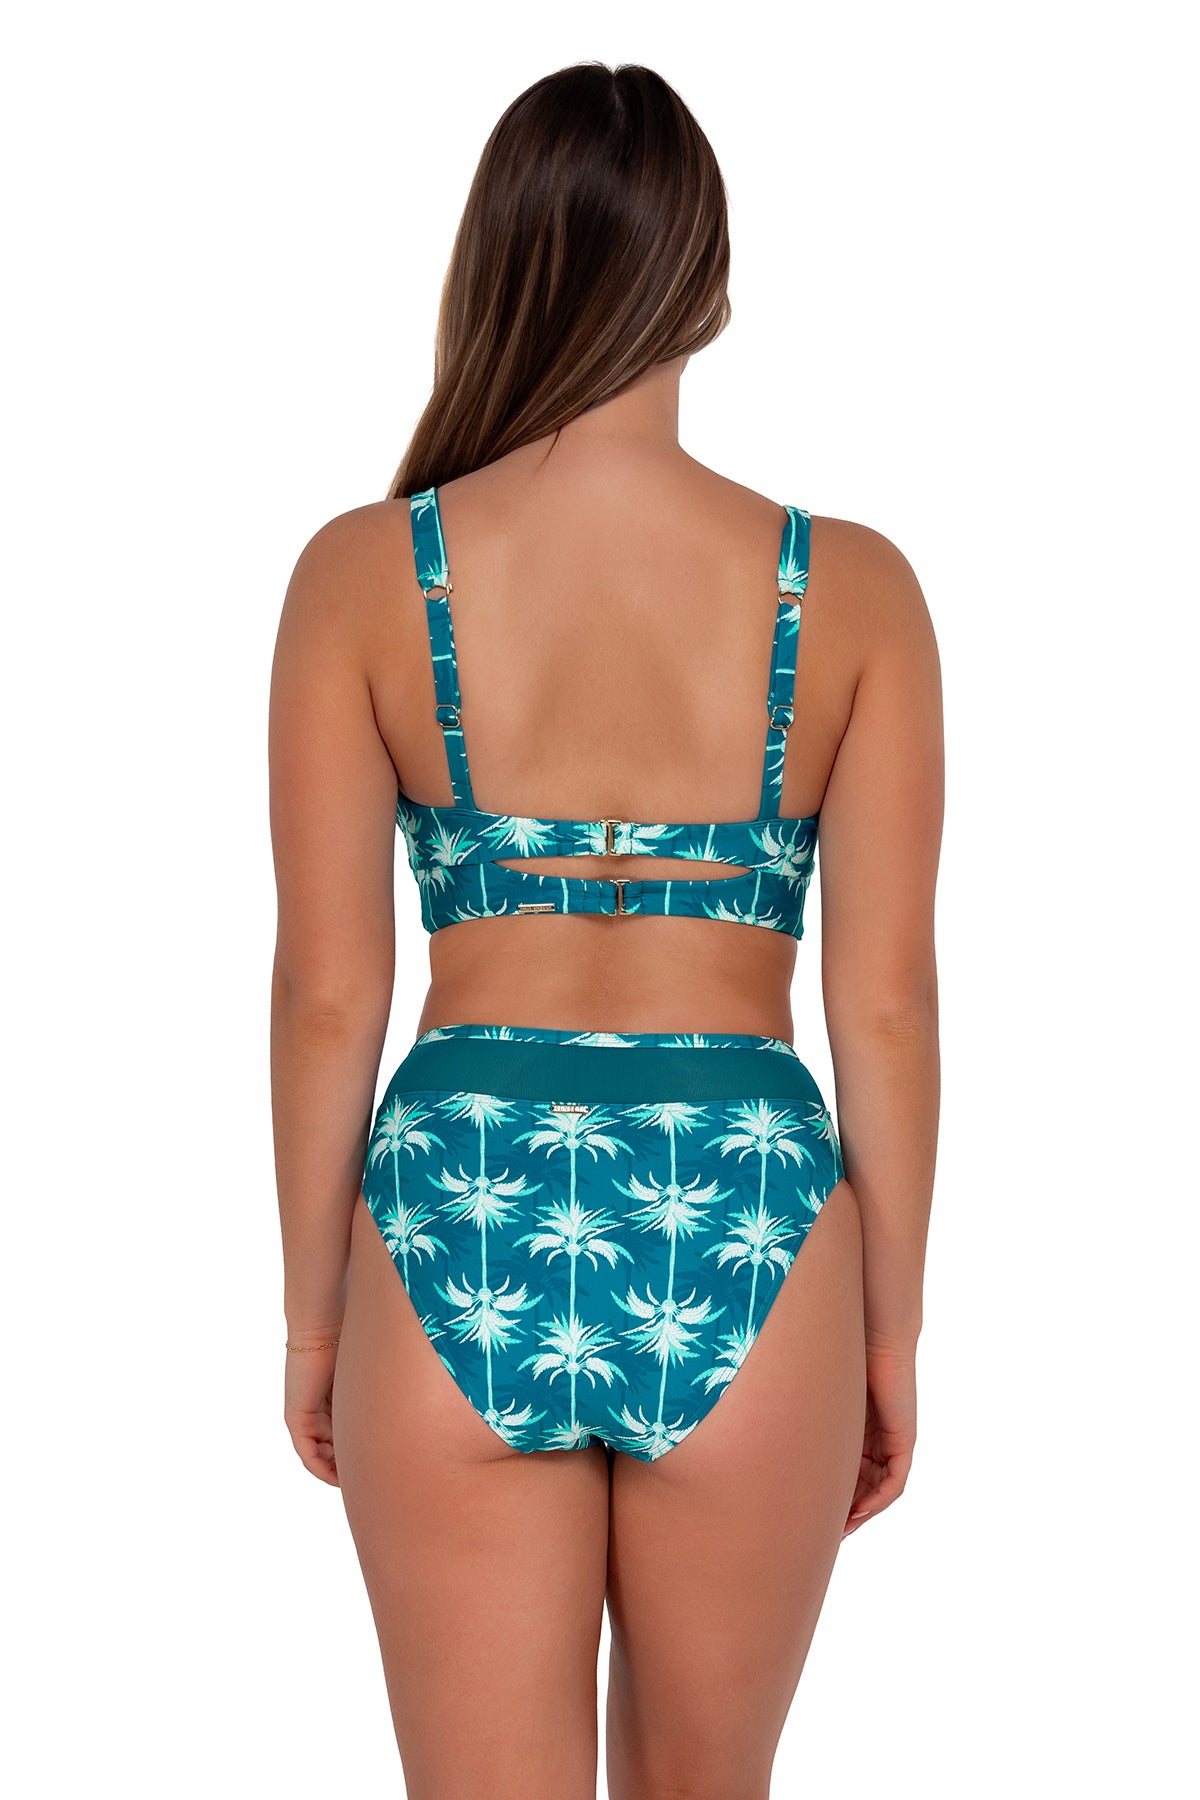 Back pose #1 of Taylor wearing Sunsets Palm Beach Danica Top paired with Annie High Waist bikini bottom